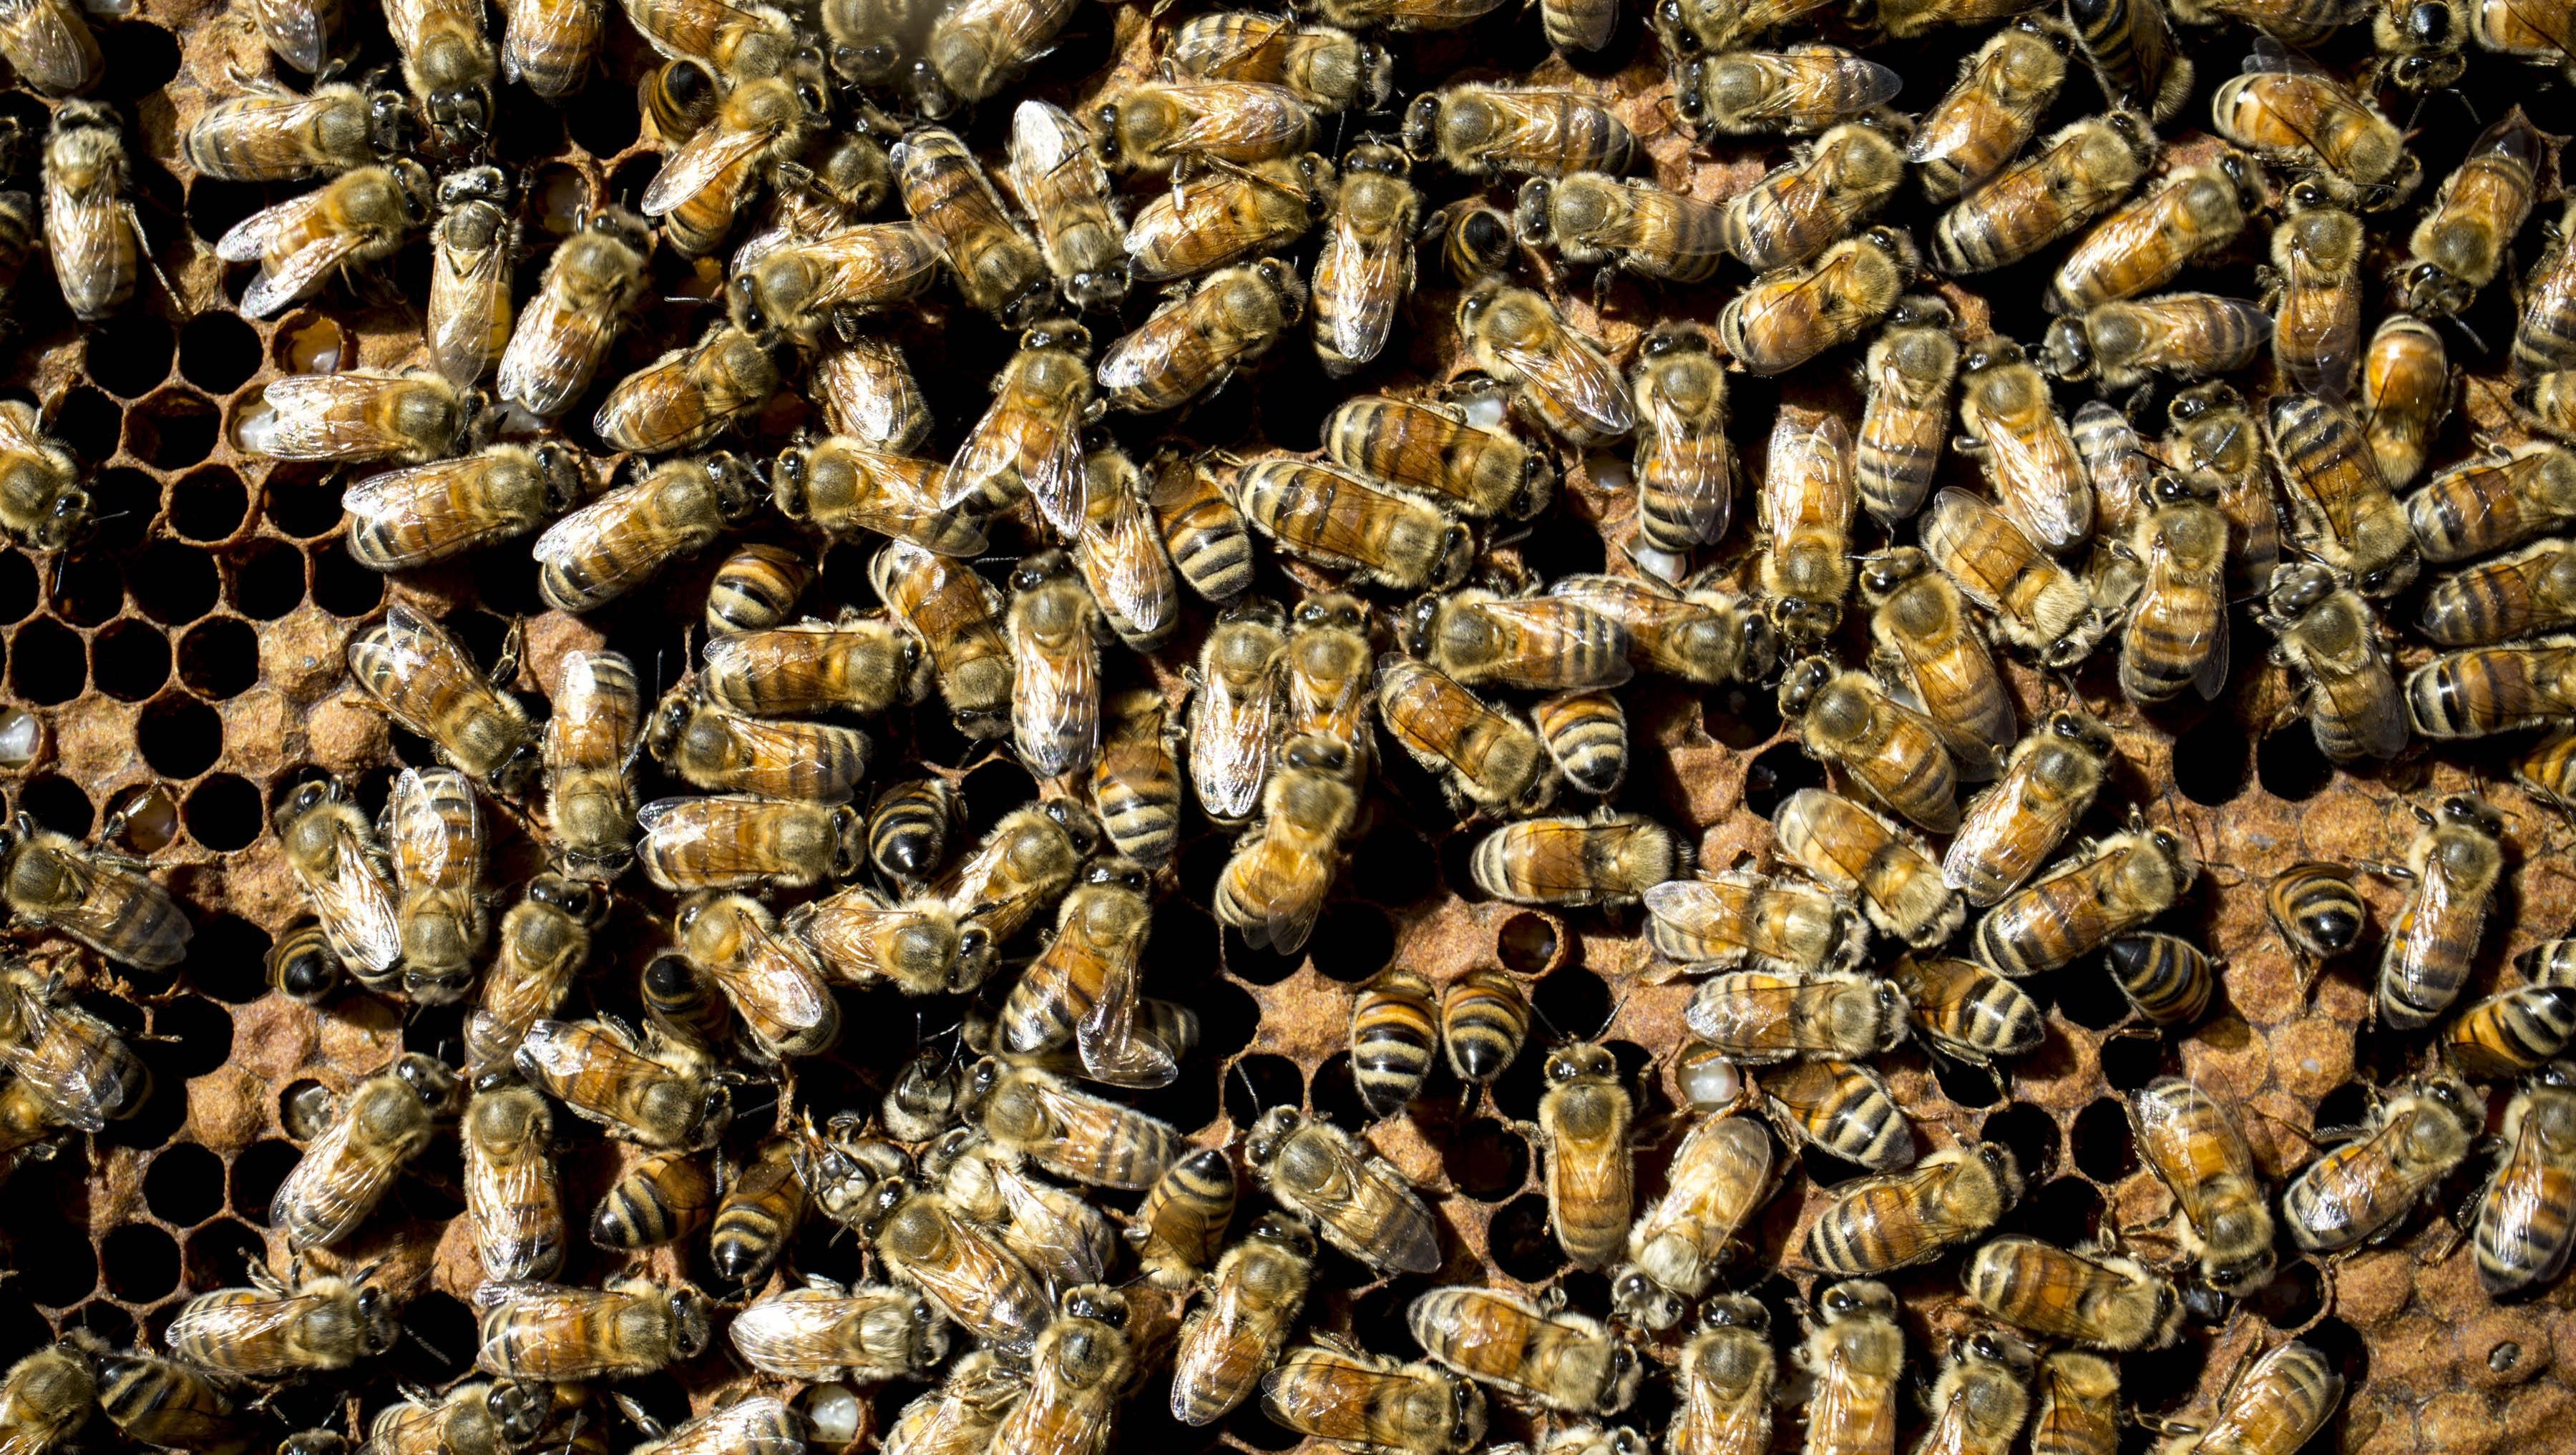 Bees Sting Several People Including An Infant In Mesa And Chandler